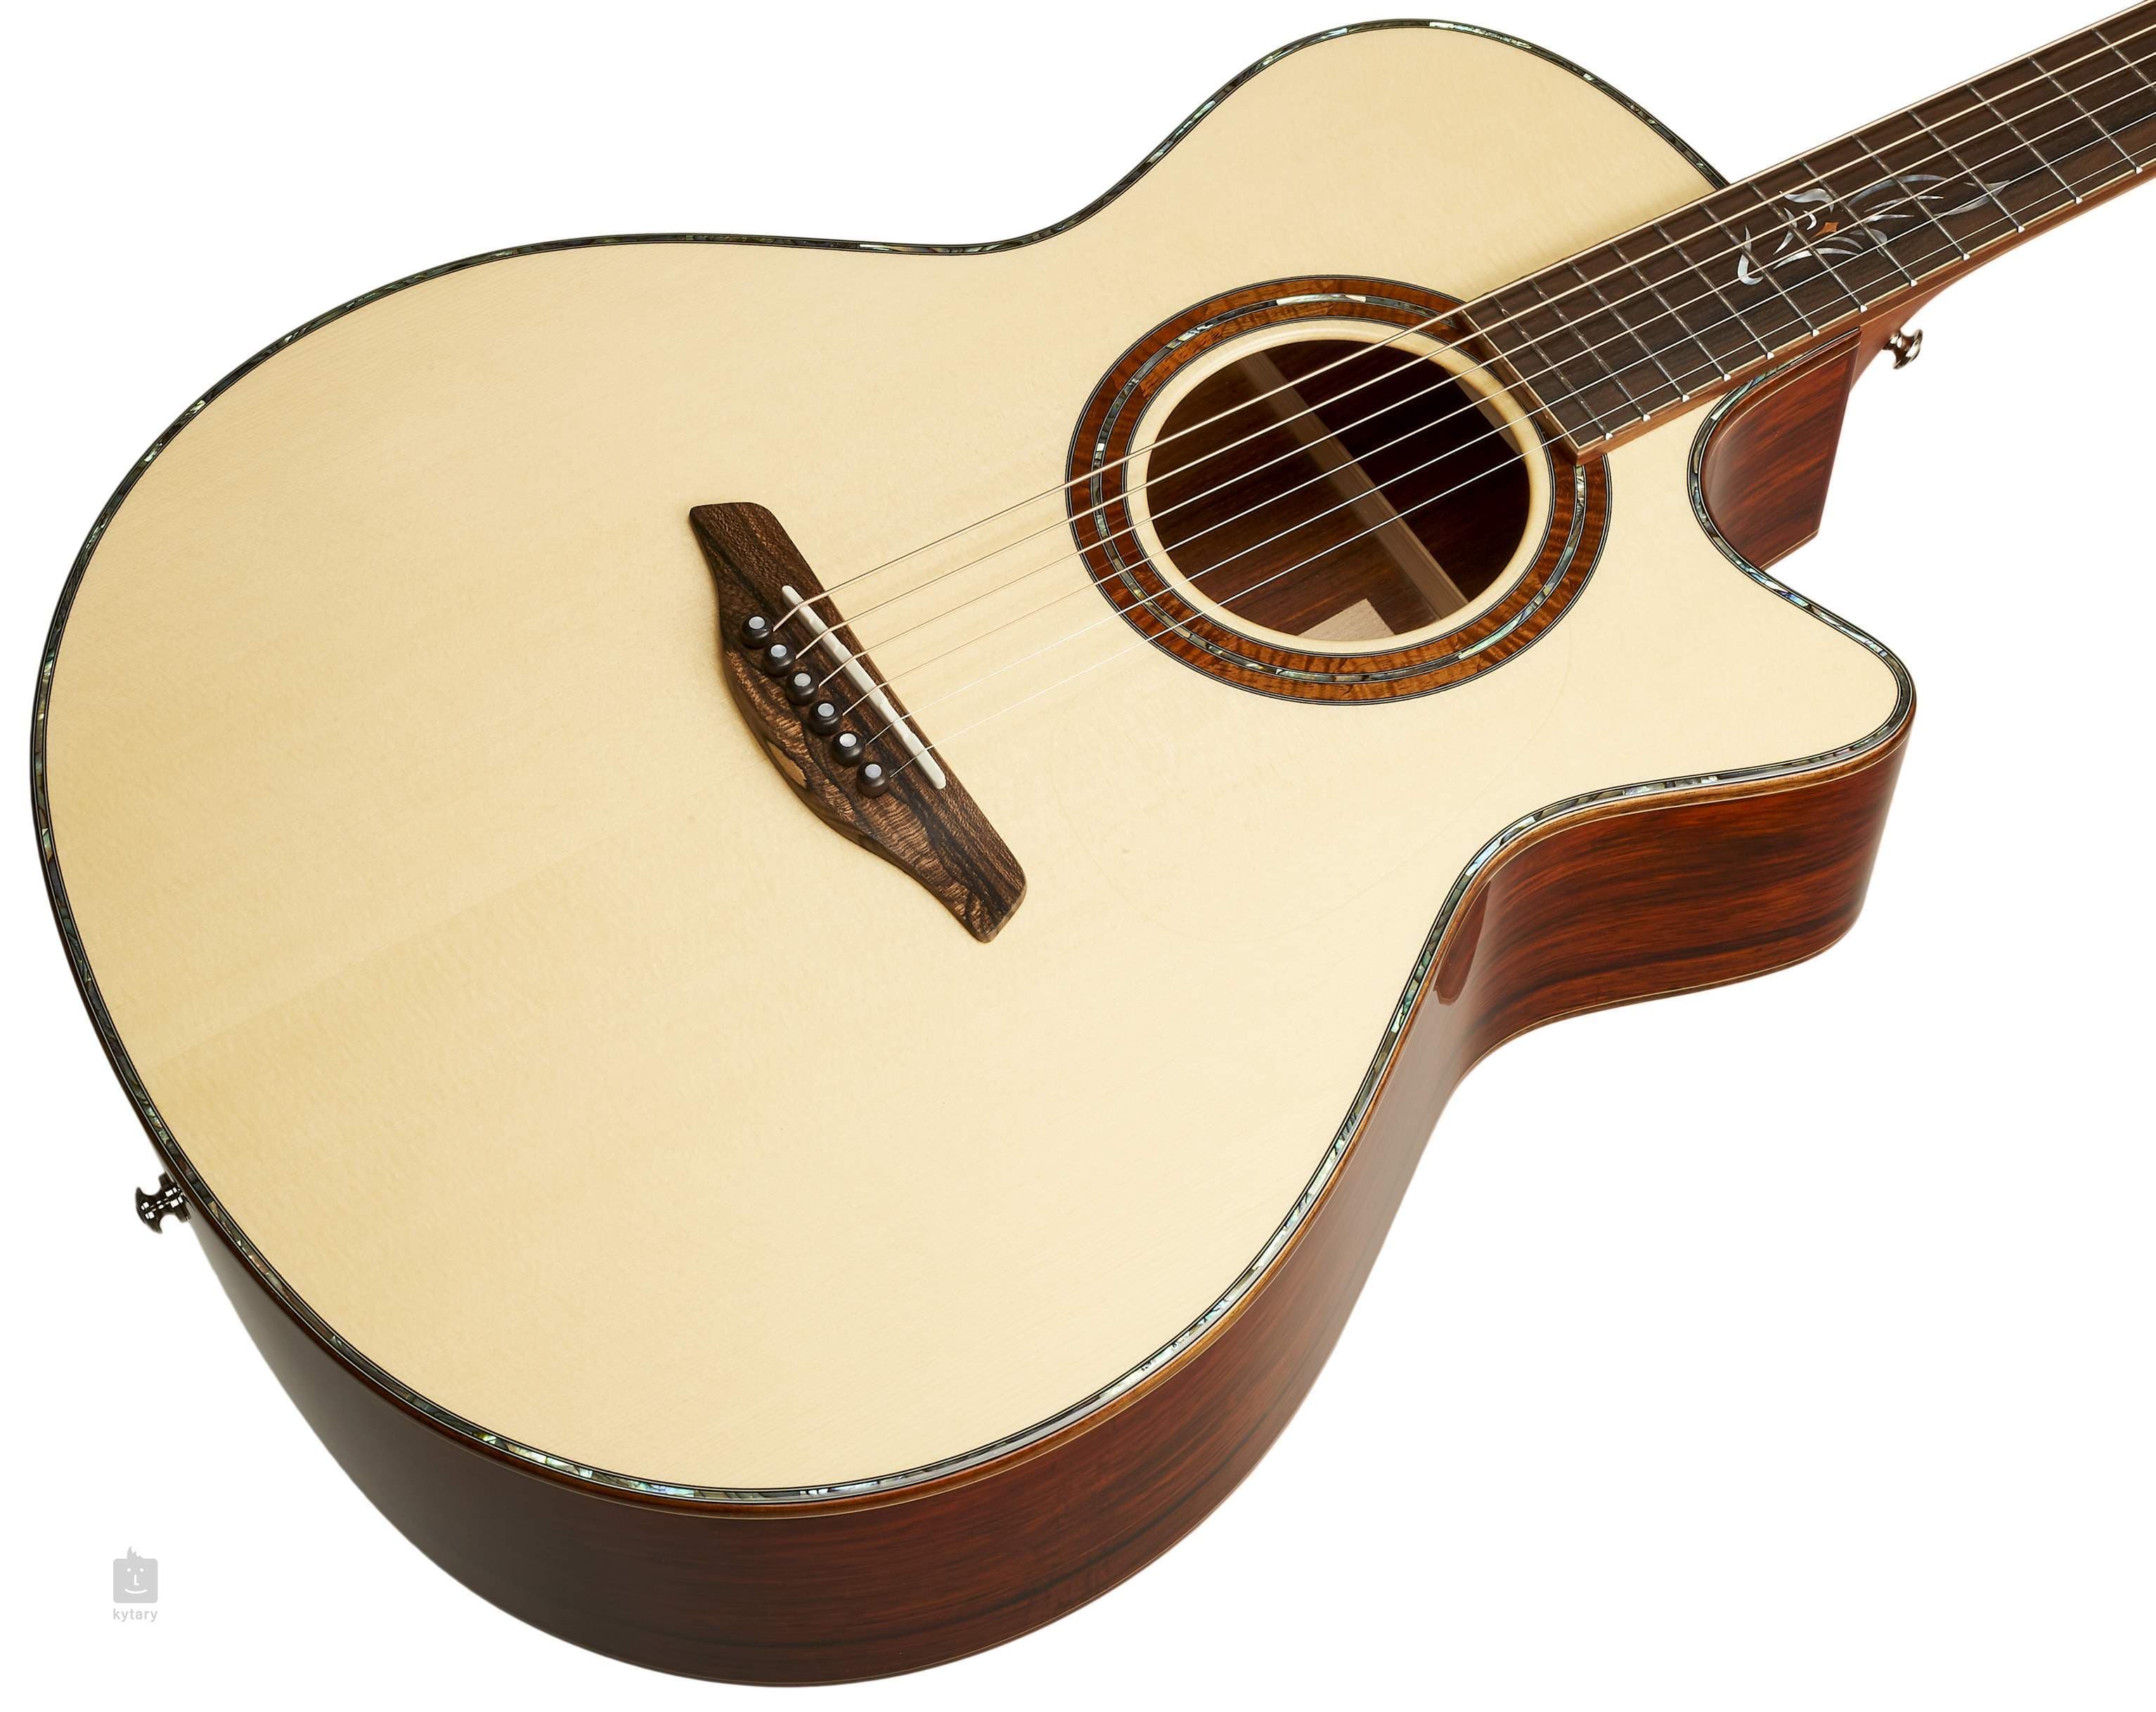 Furch Red Gc LC Alpine spruce / Cocobolo, Acoustic Guitar for sale at Richards Guitars.